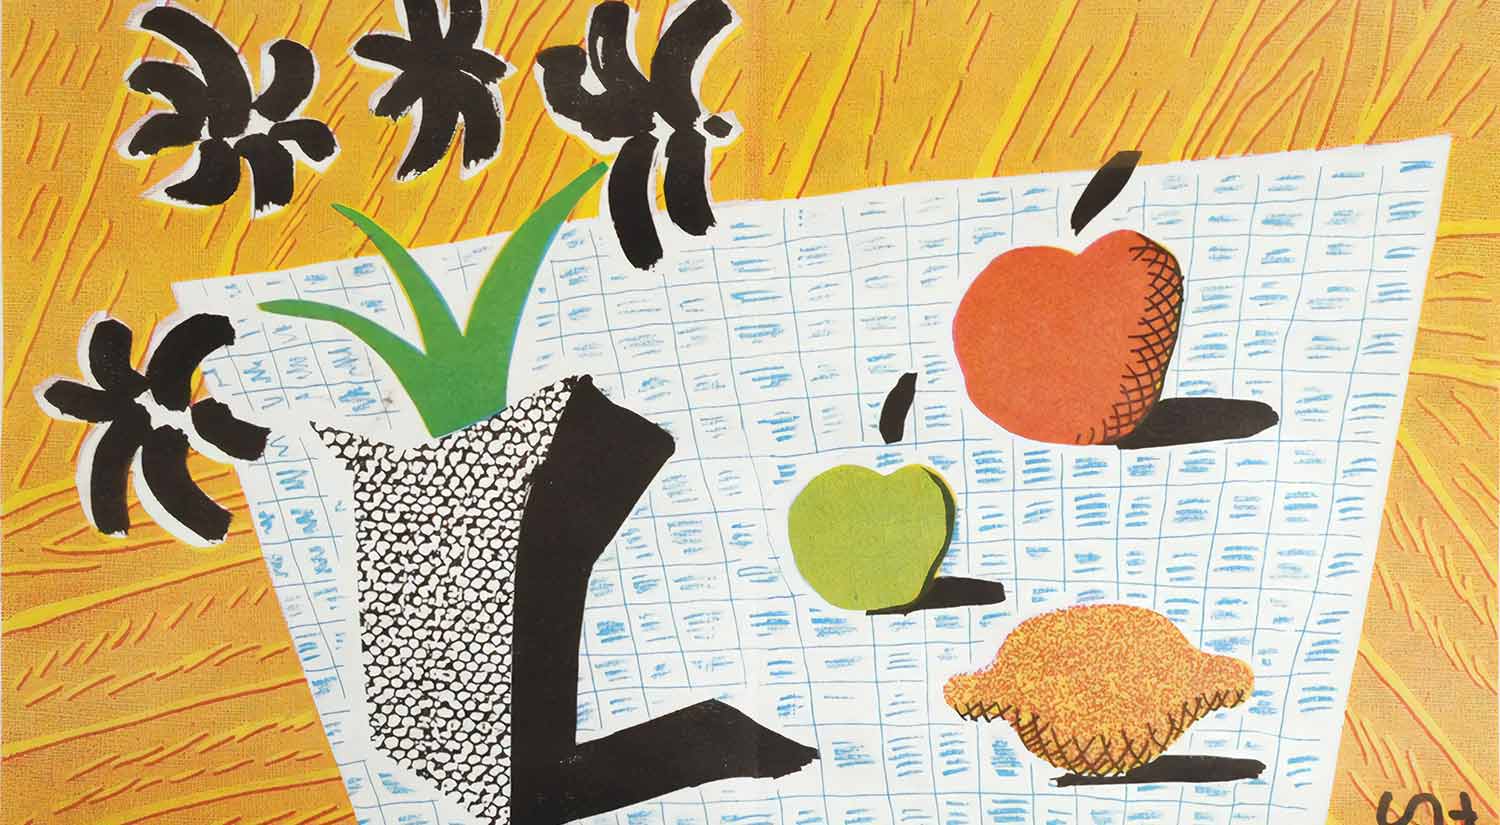 Two Apples and One Lemon and Four Flowers by David Hockney, lithograph, 1997